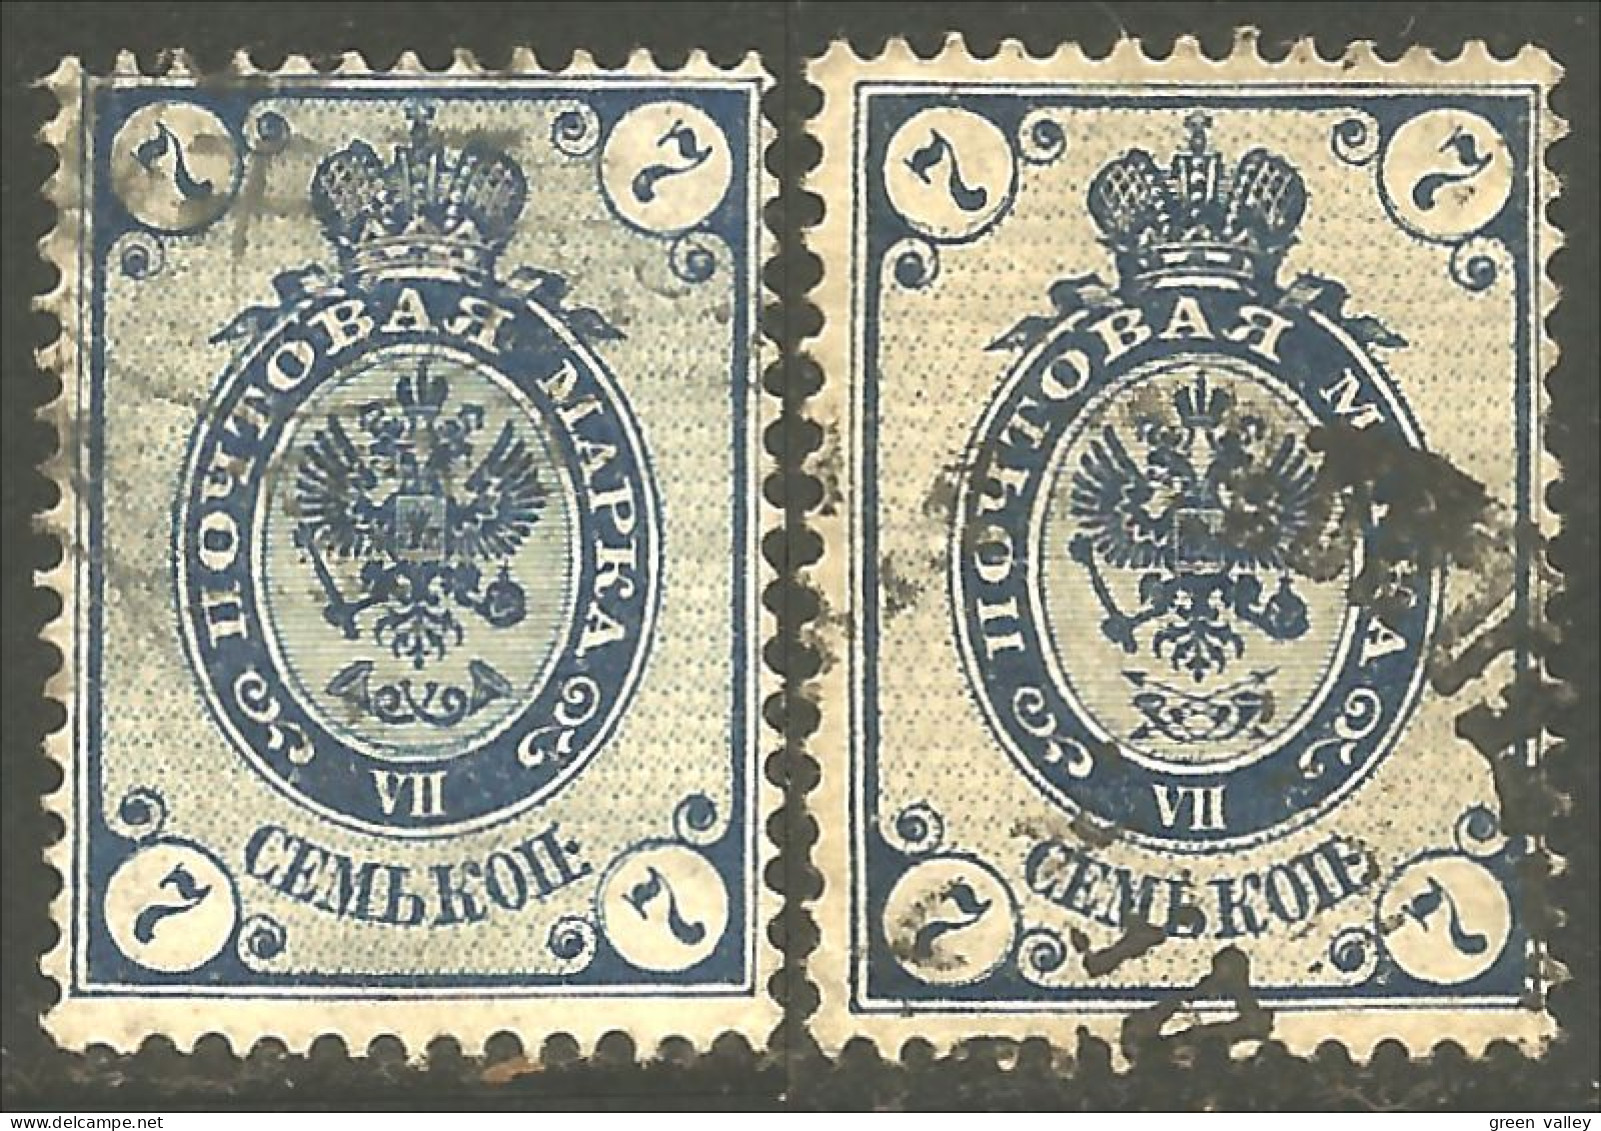 771 Russie 7k 1883 And 1889 Blue Aigle Imperial Eagle Post Horn Cor Postal (RUZ-342c) - Used Stamps